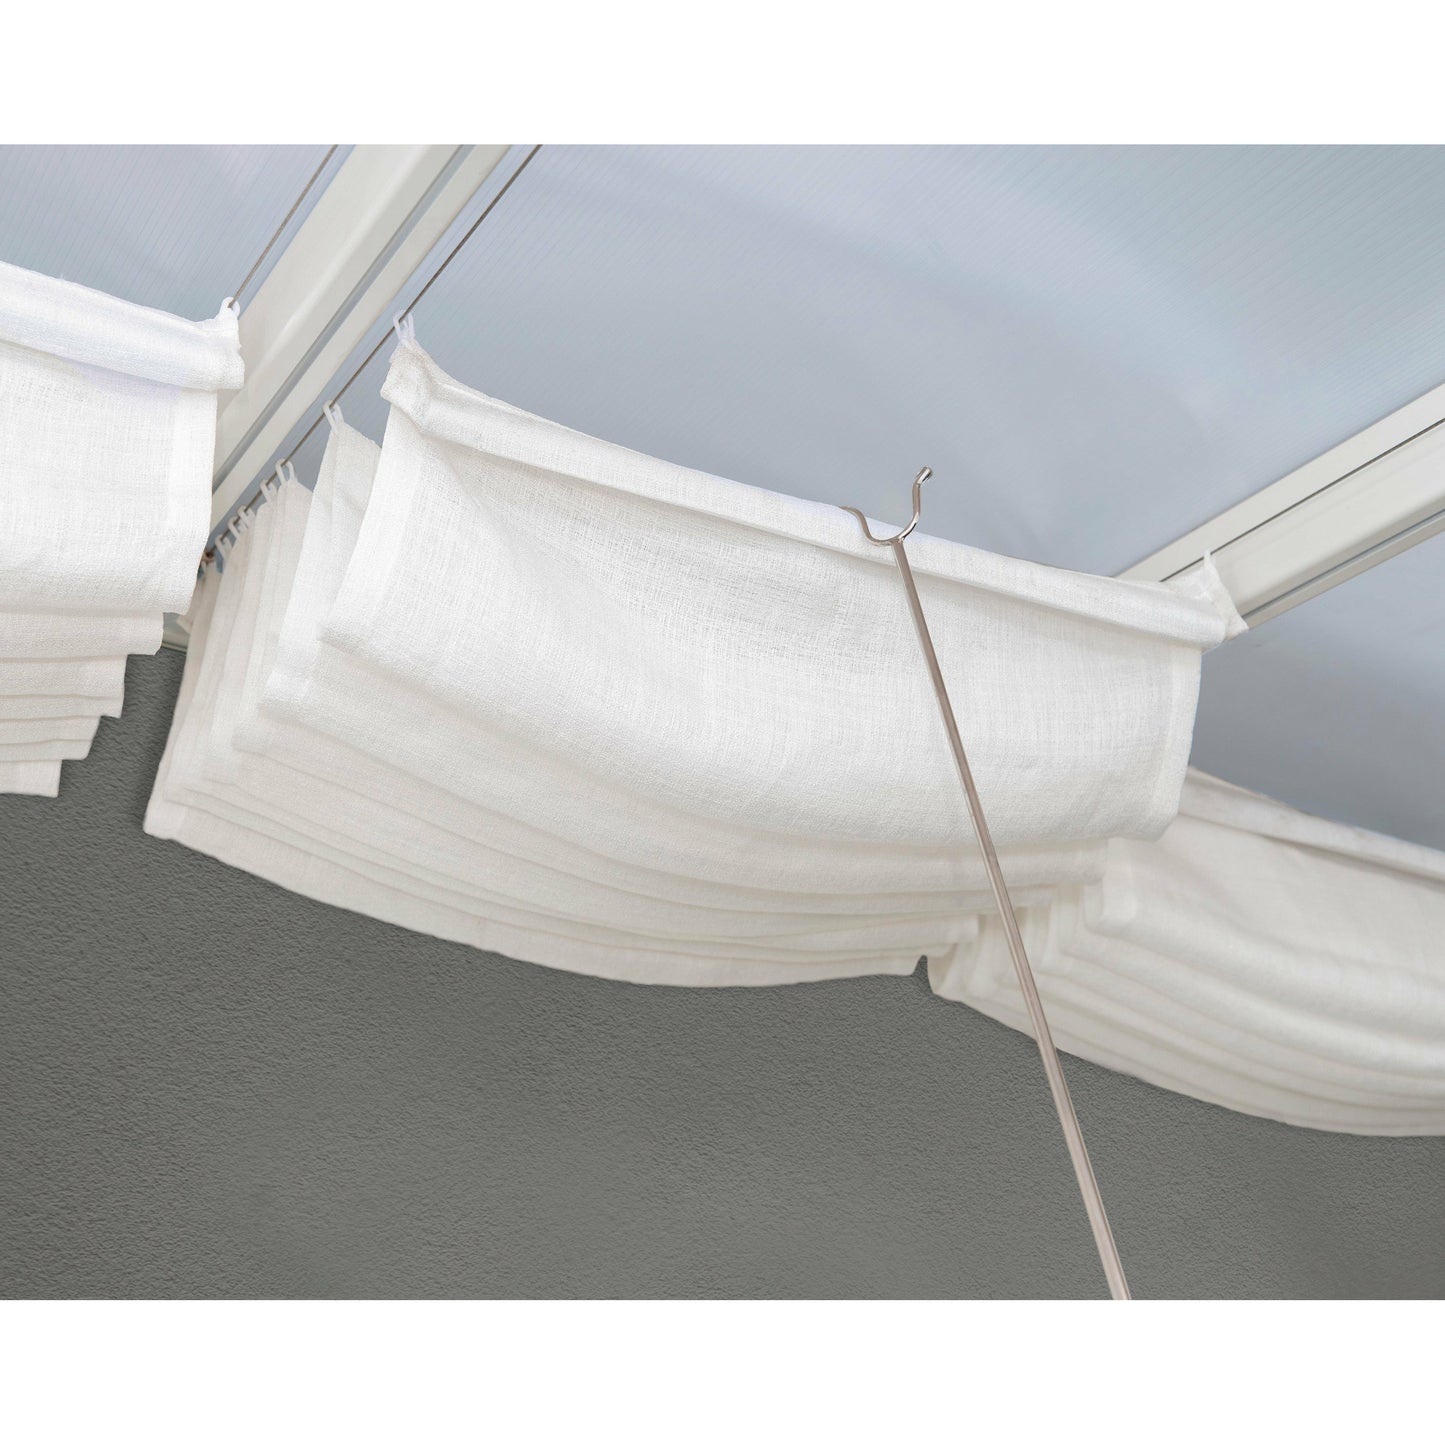 Palram Patio Cover Blinds 10' x 18' White